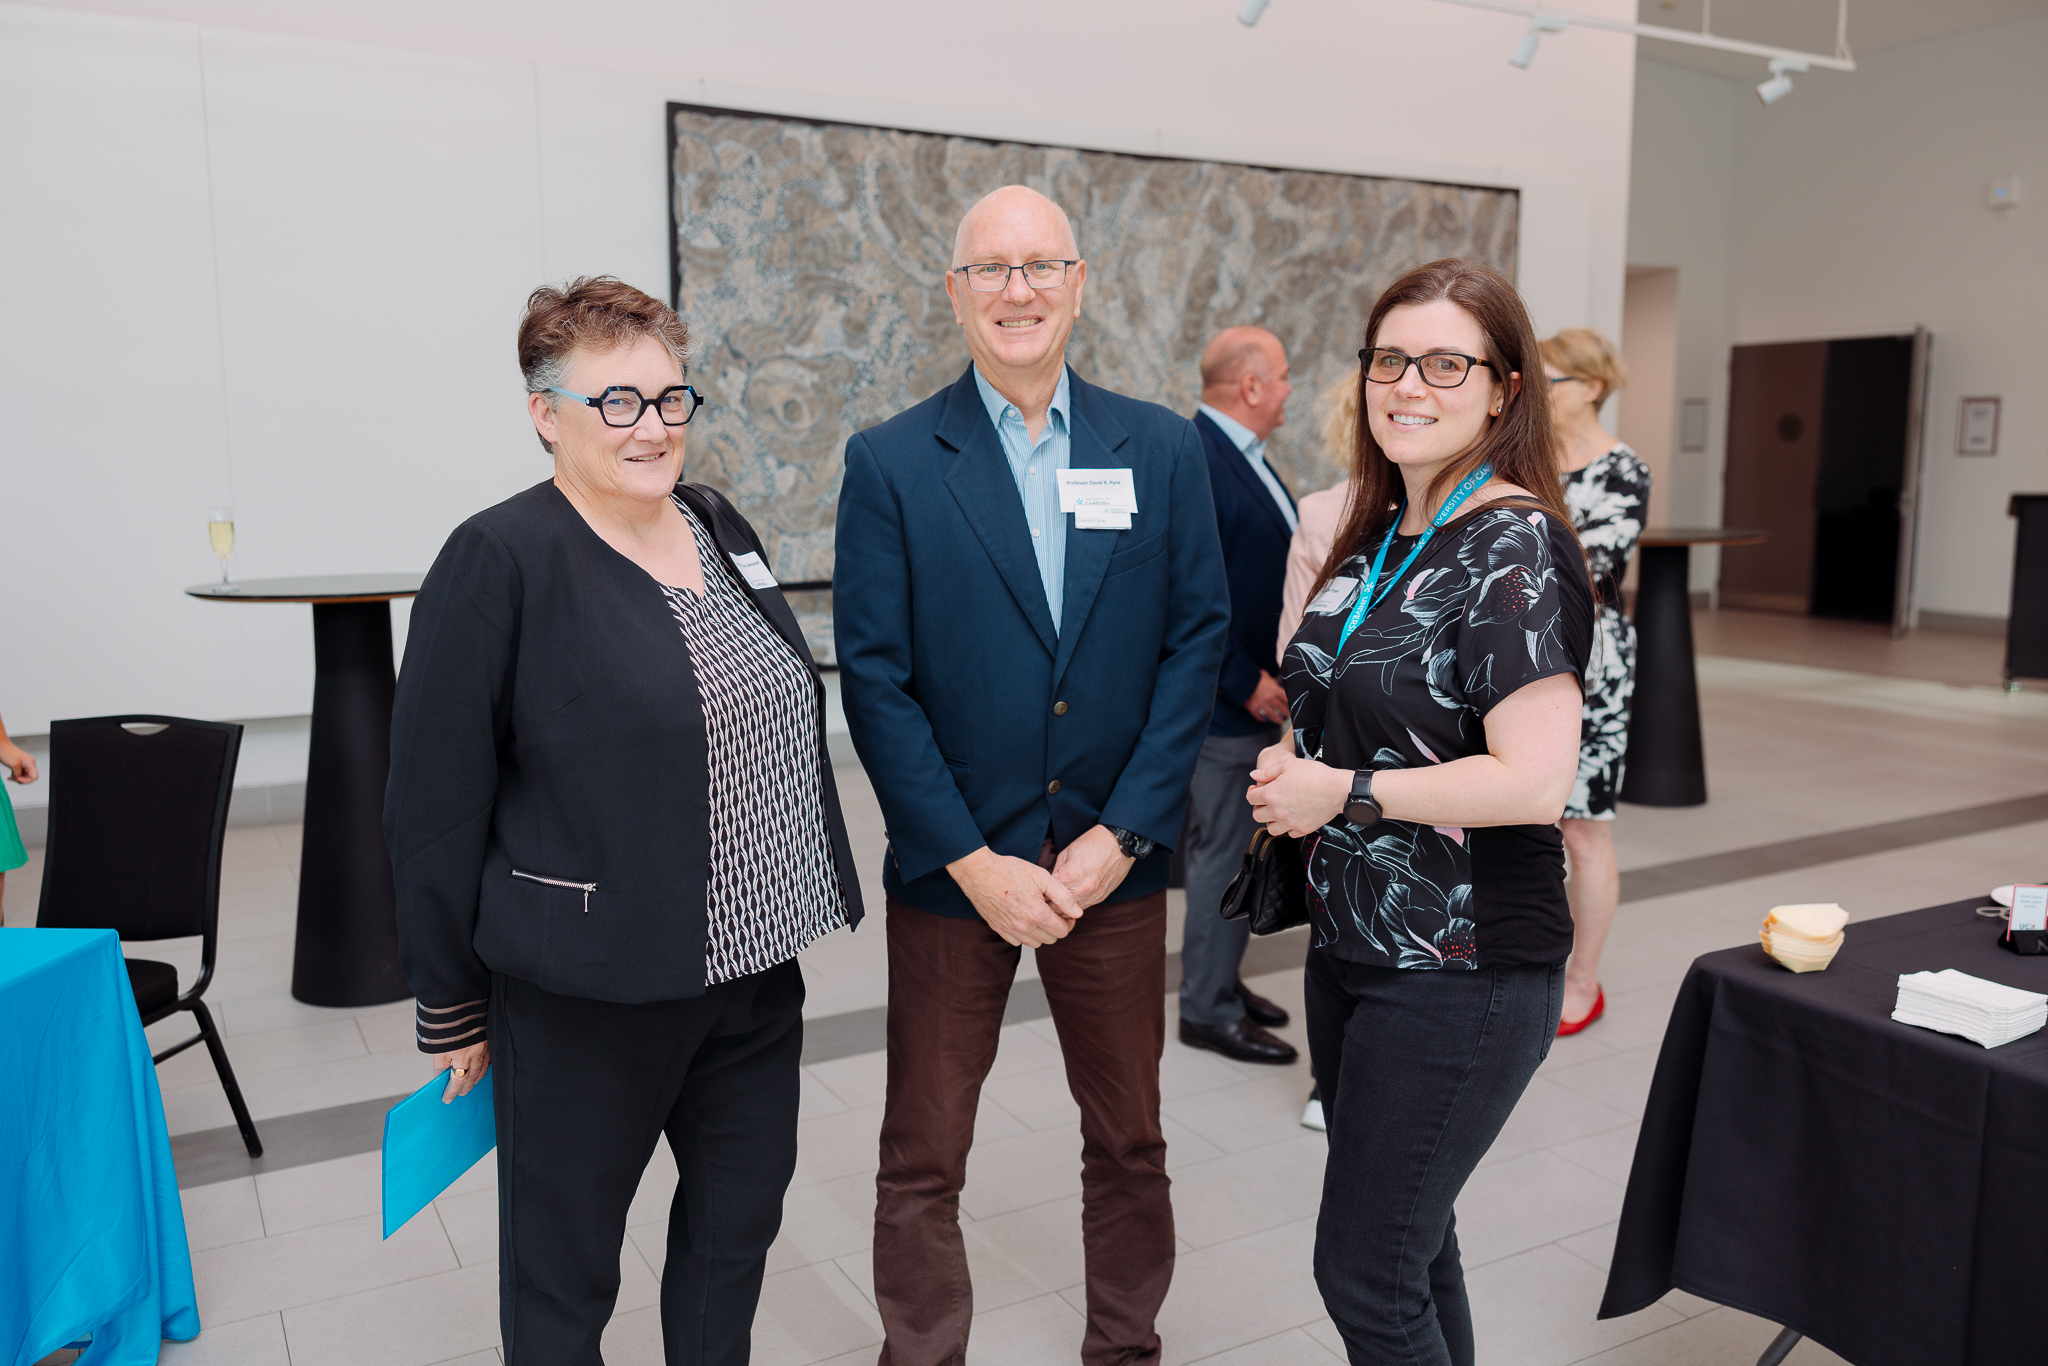 Professor Lucy Johnston, Adjunct Professor David Pyne and Dean of the College of Adjuncts Zoe Piper attending the Adjunct End Of Year Reception.